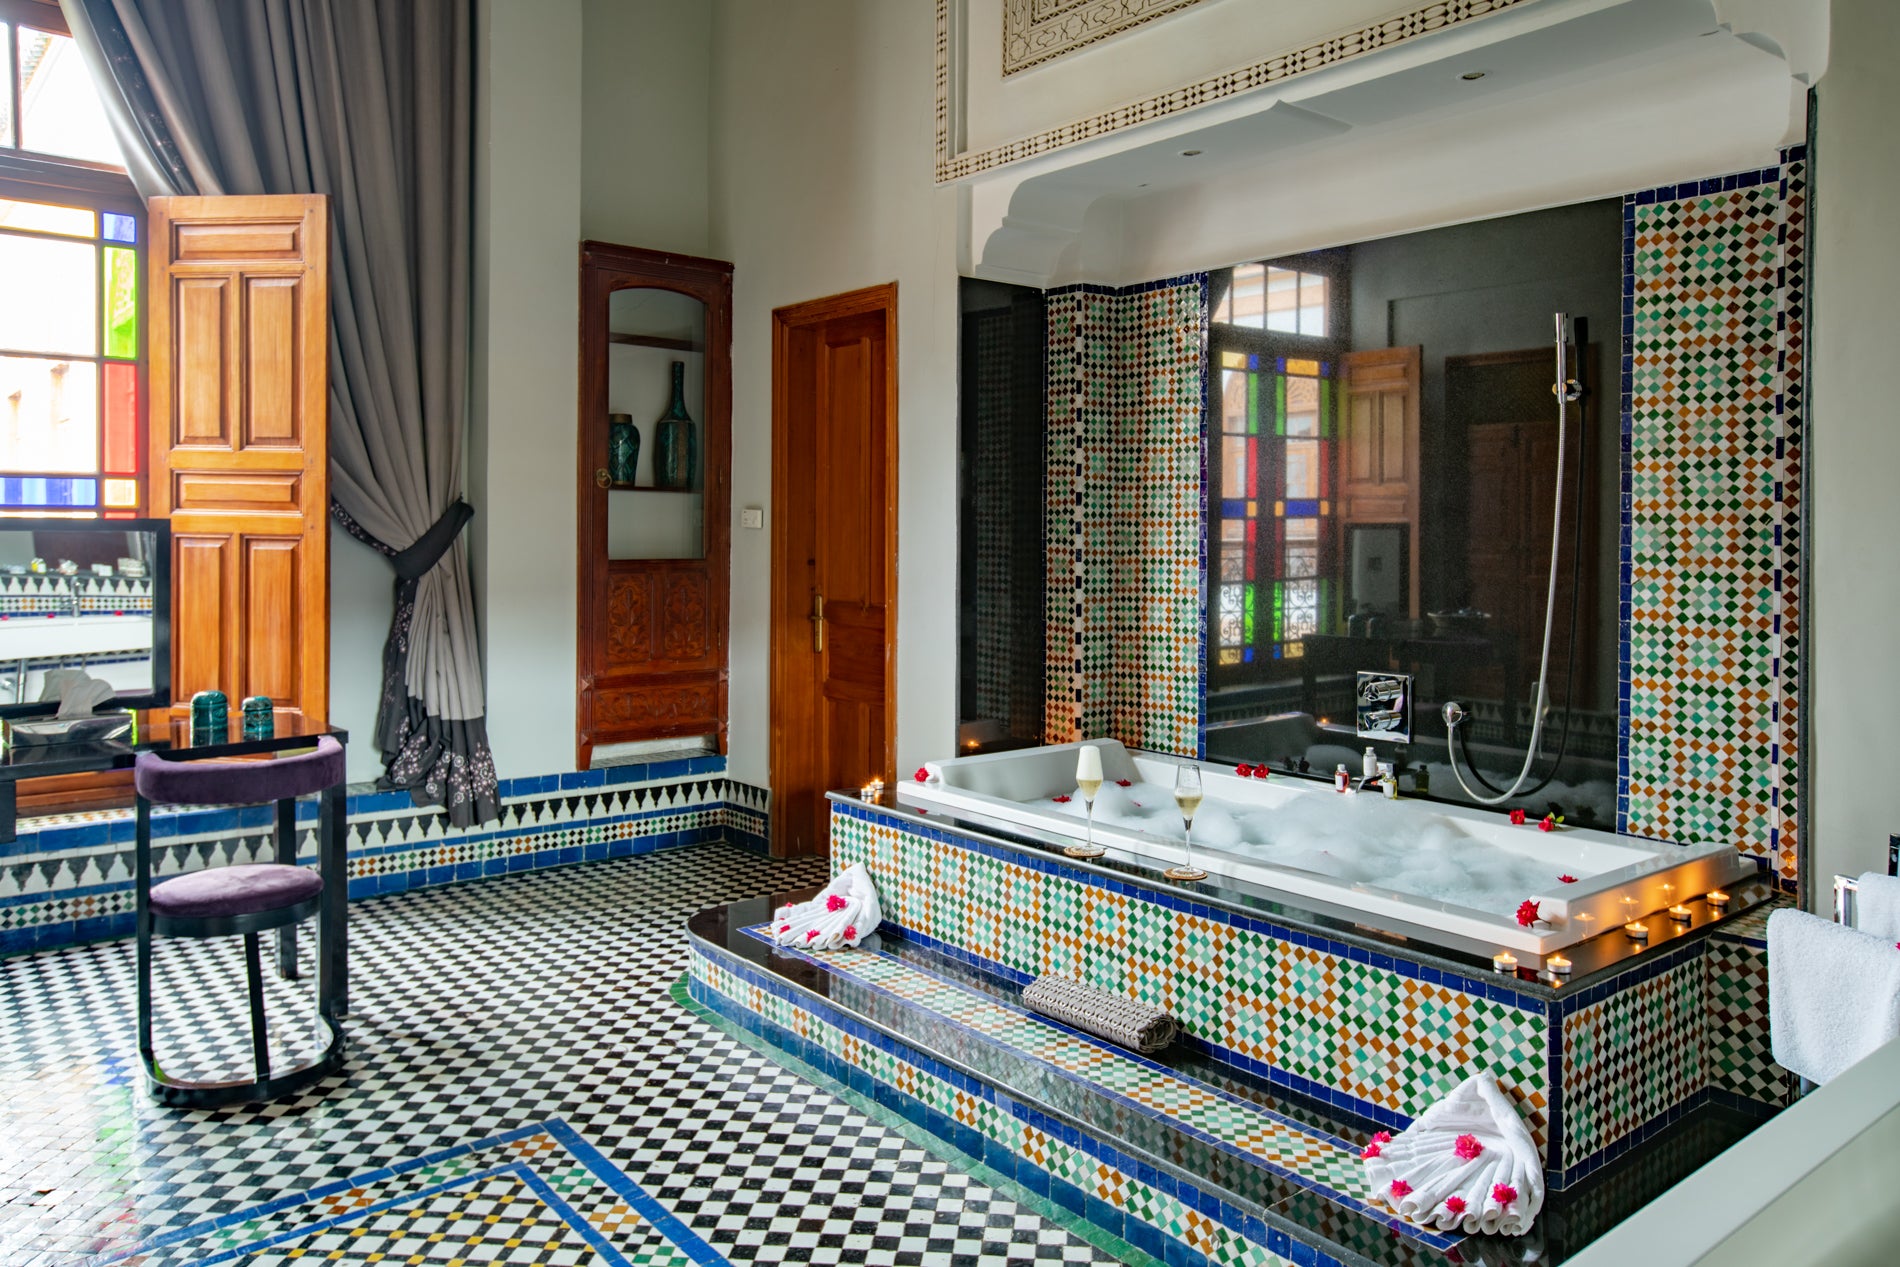 Bathrooms are swathed in intricate tilework